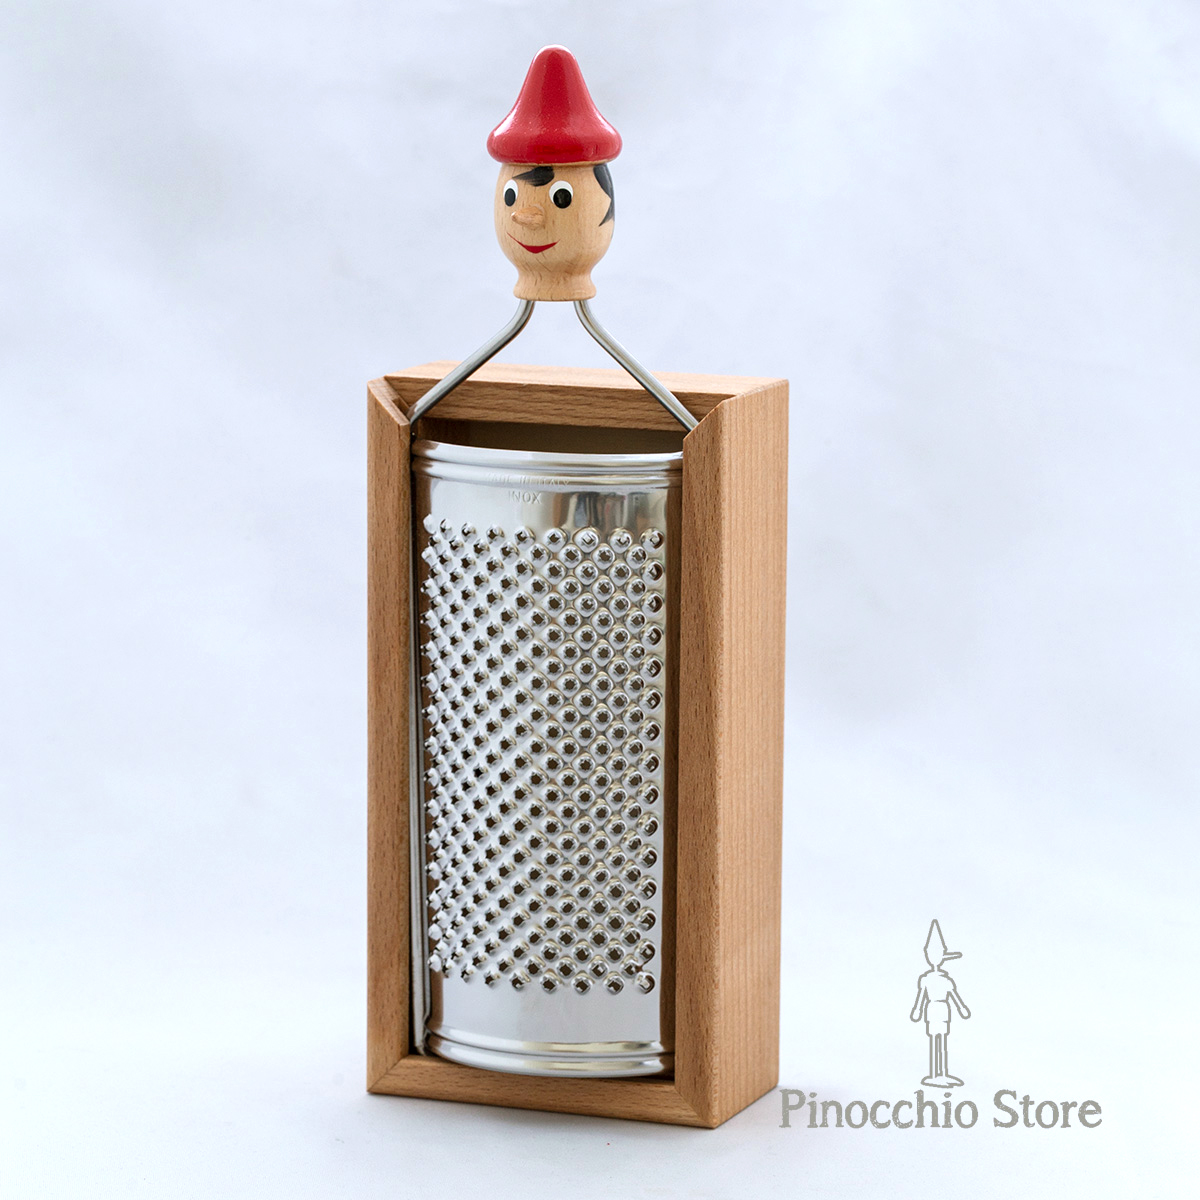 Grater with Pinocchio container